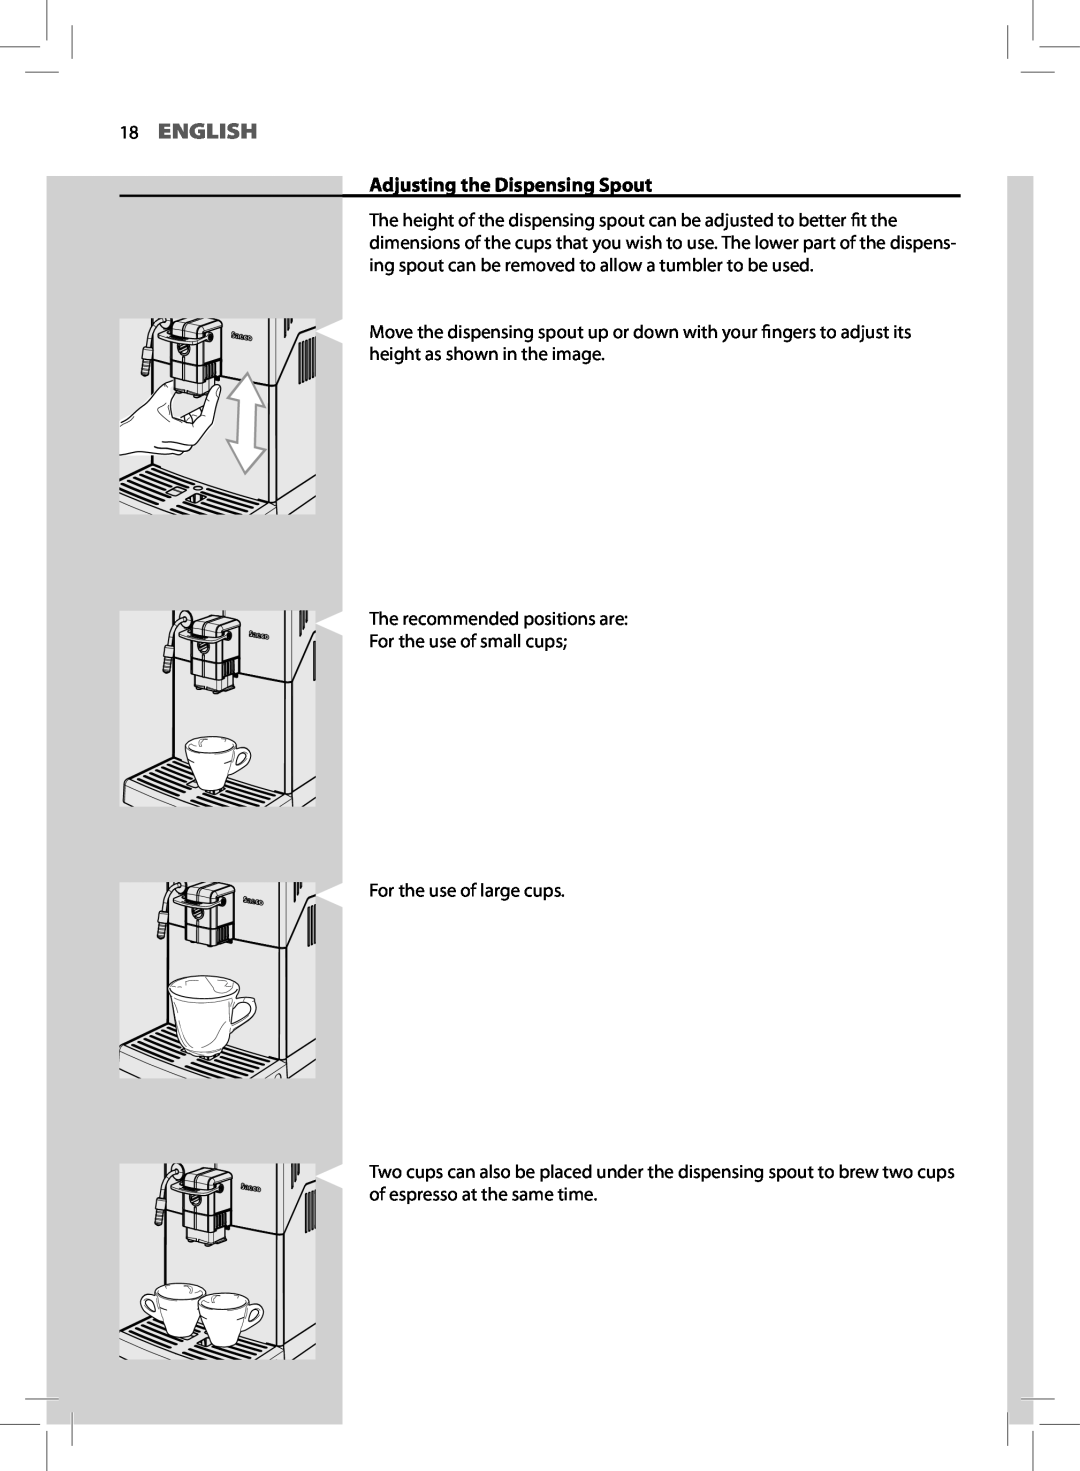 Saeco Coffee Makers HD8772 user manual English, Adjusting the Dispensing Spout 